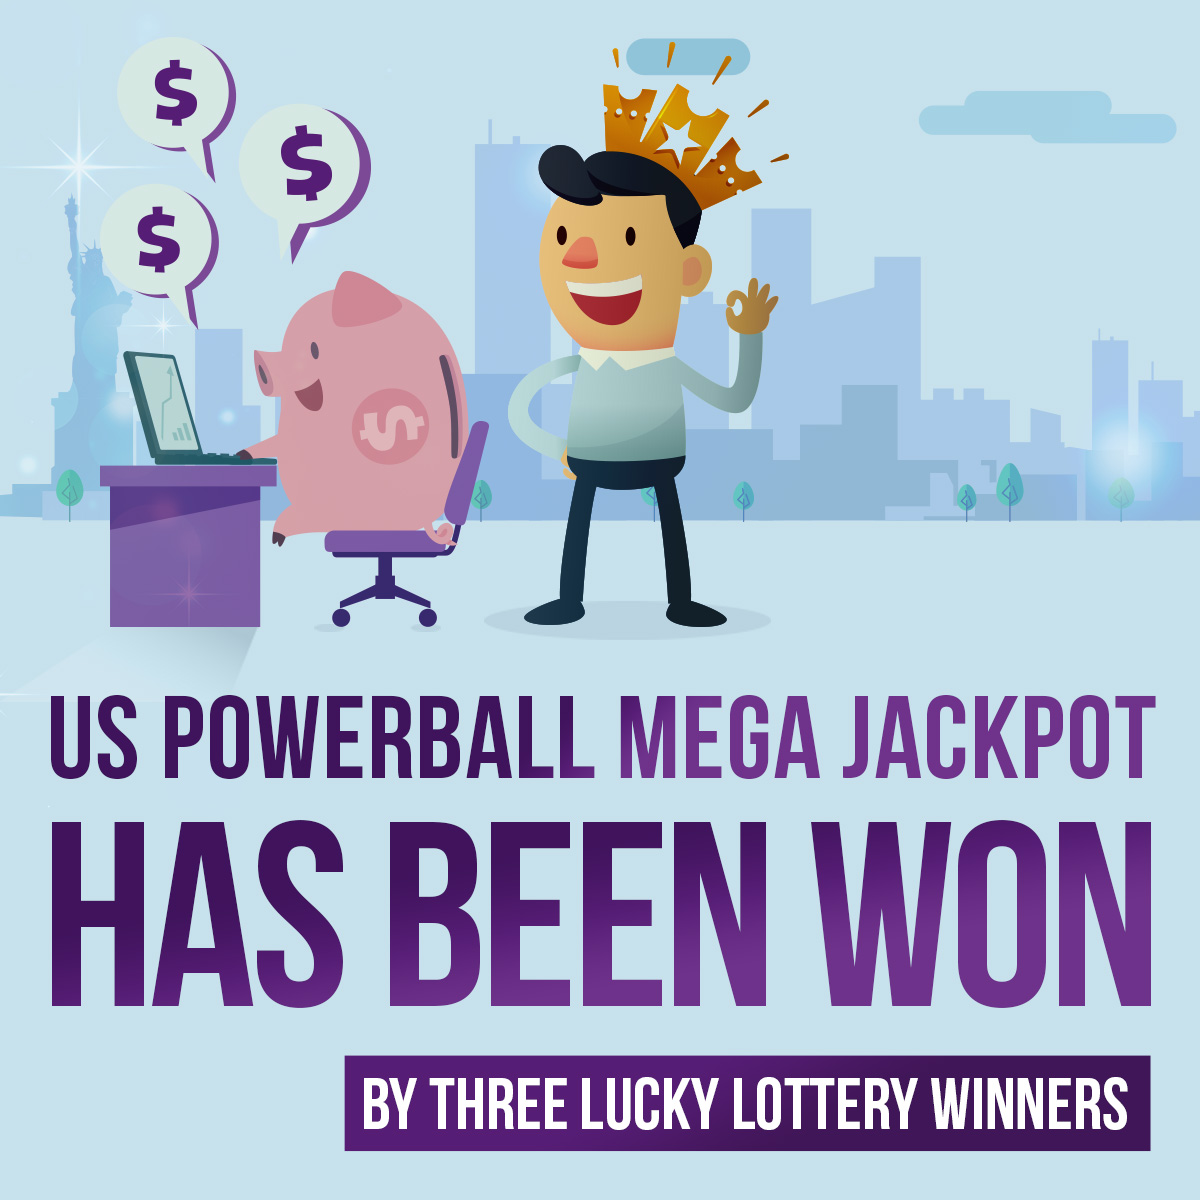 3 people in America win the $1.5 billion US Powerball lottery